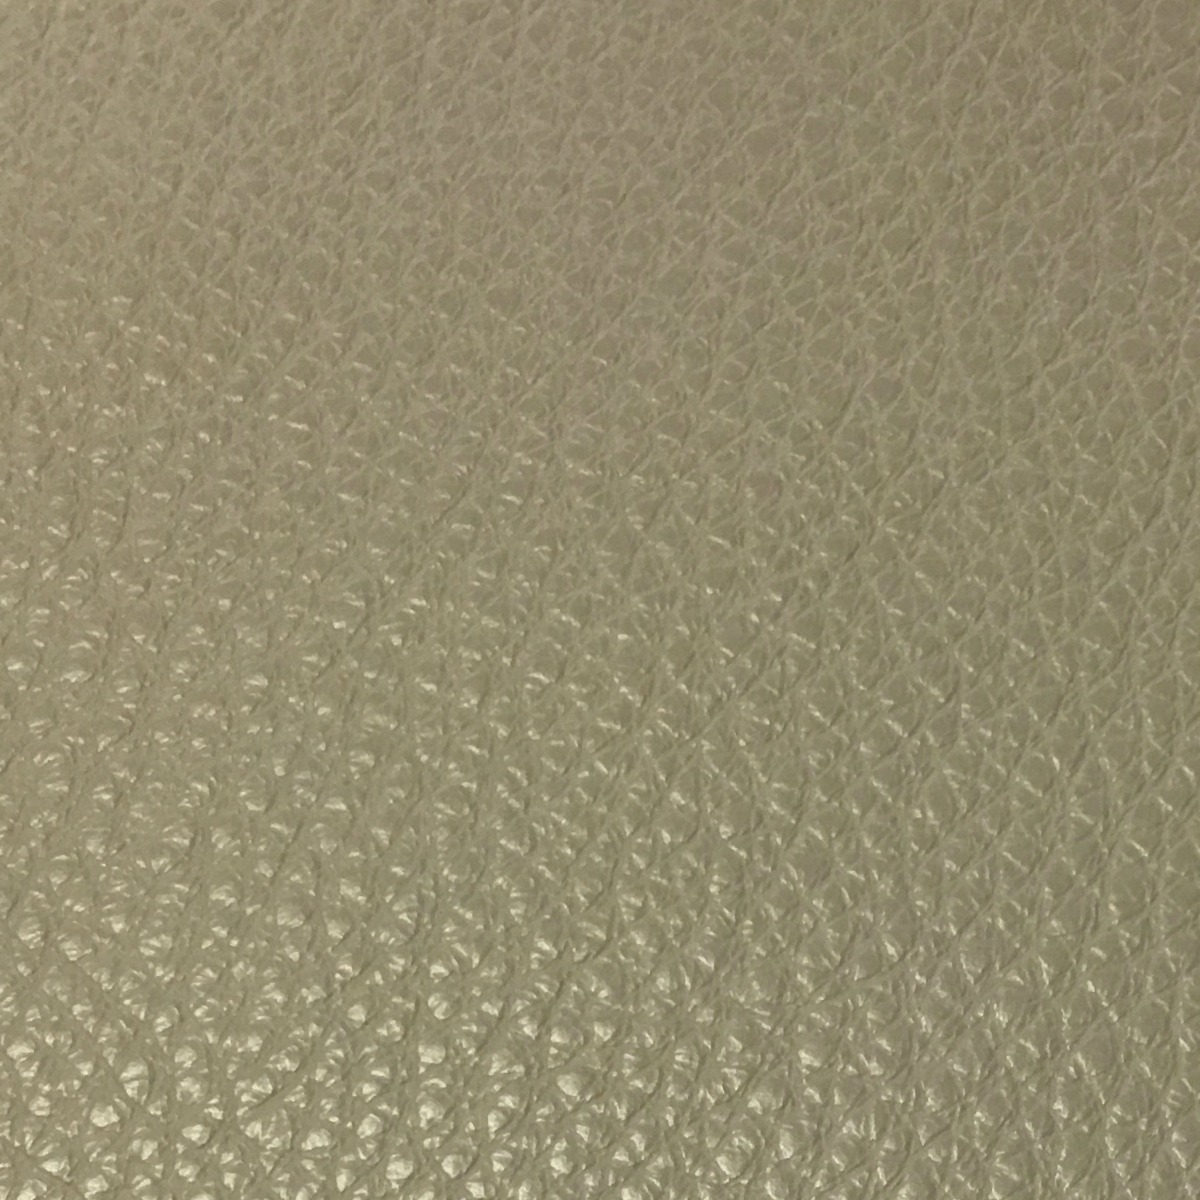 Textured upholstery leather - 11018 Taupe Mountbatten